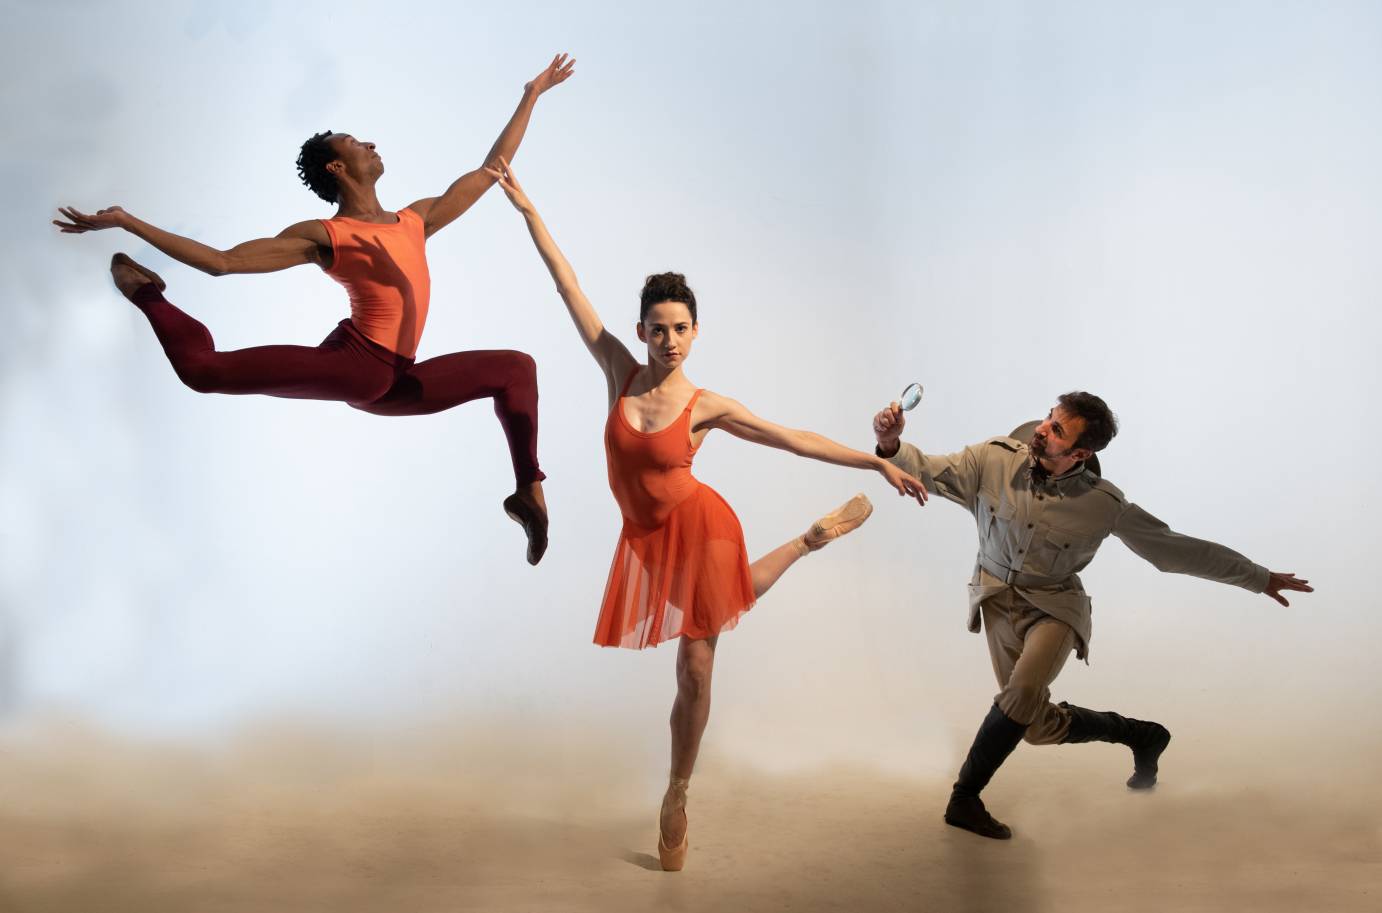 One dancer jumps into the air as one woman poses and a man holds a magnifying glass